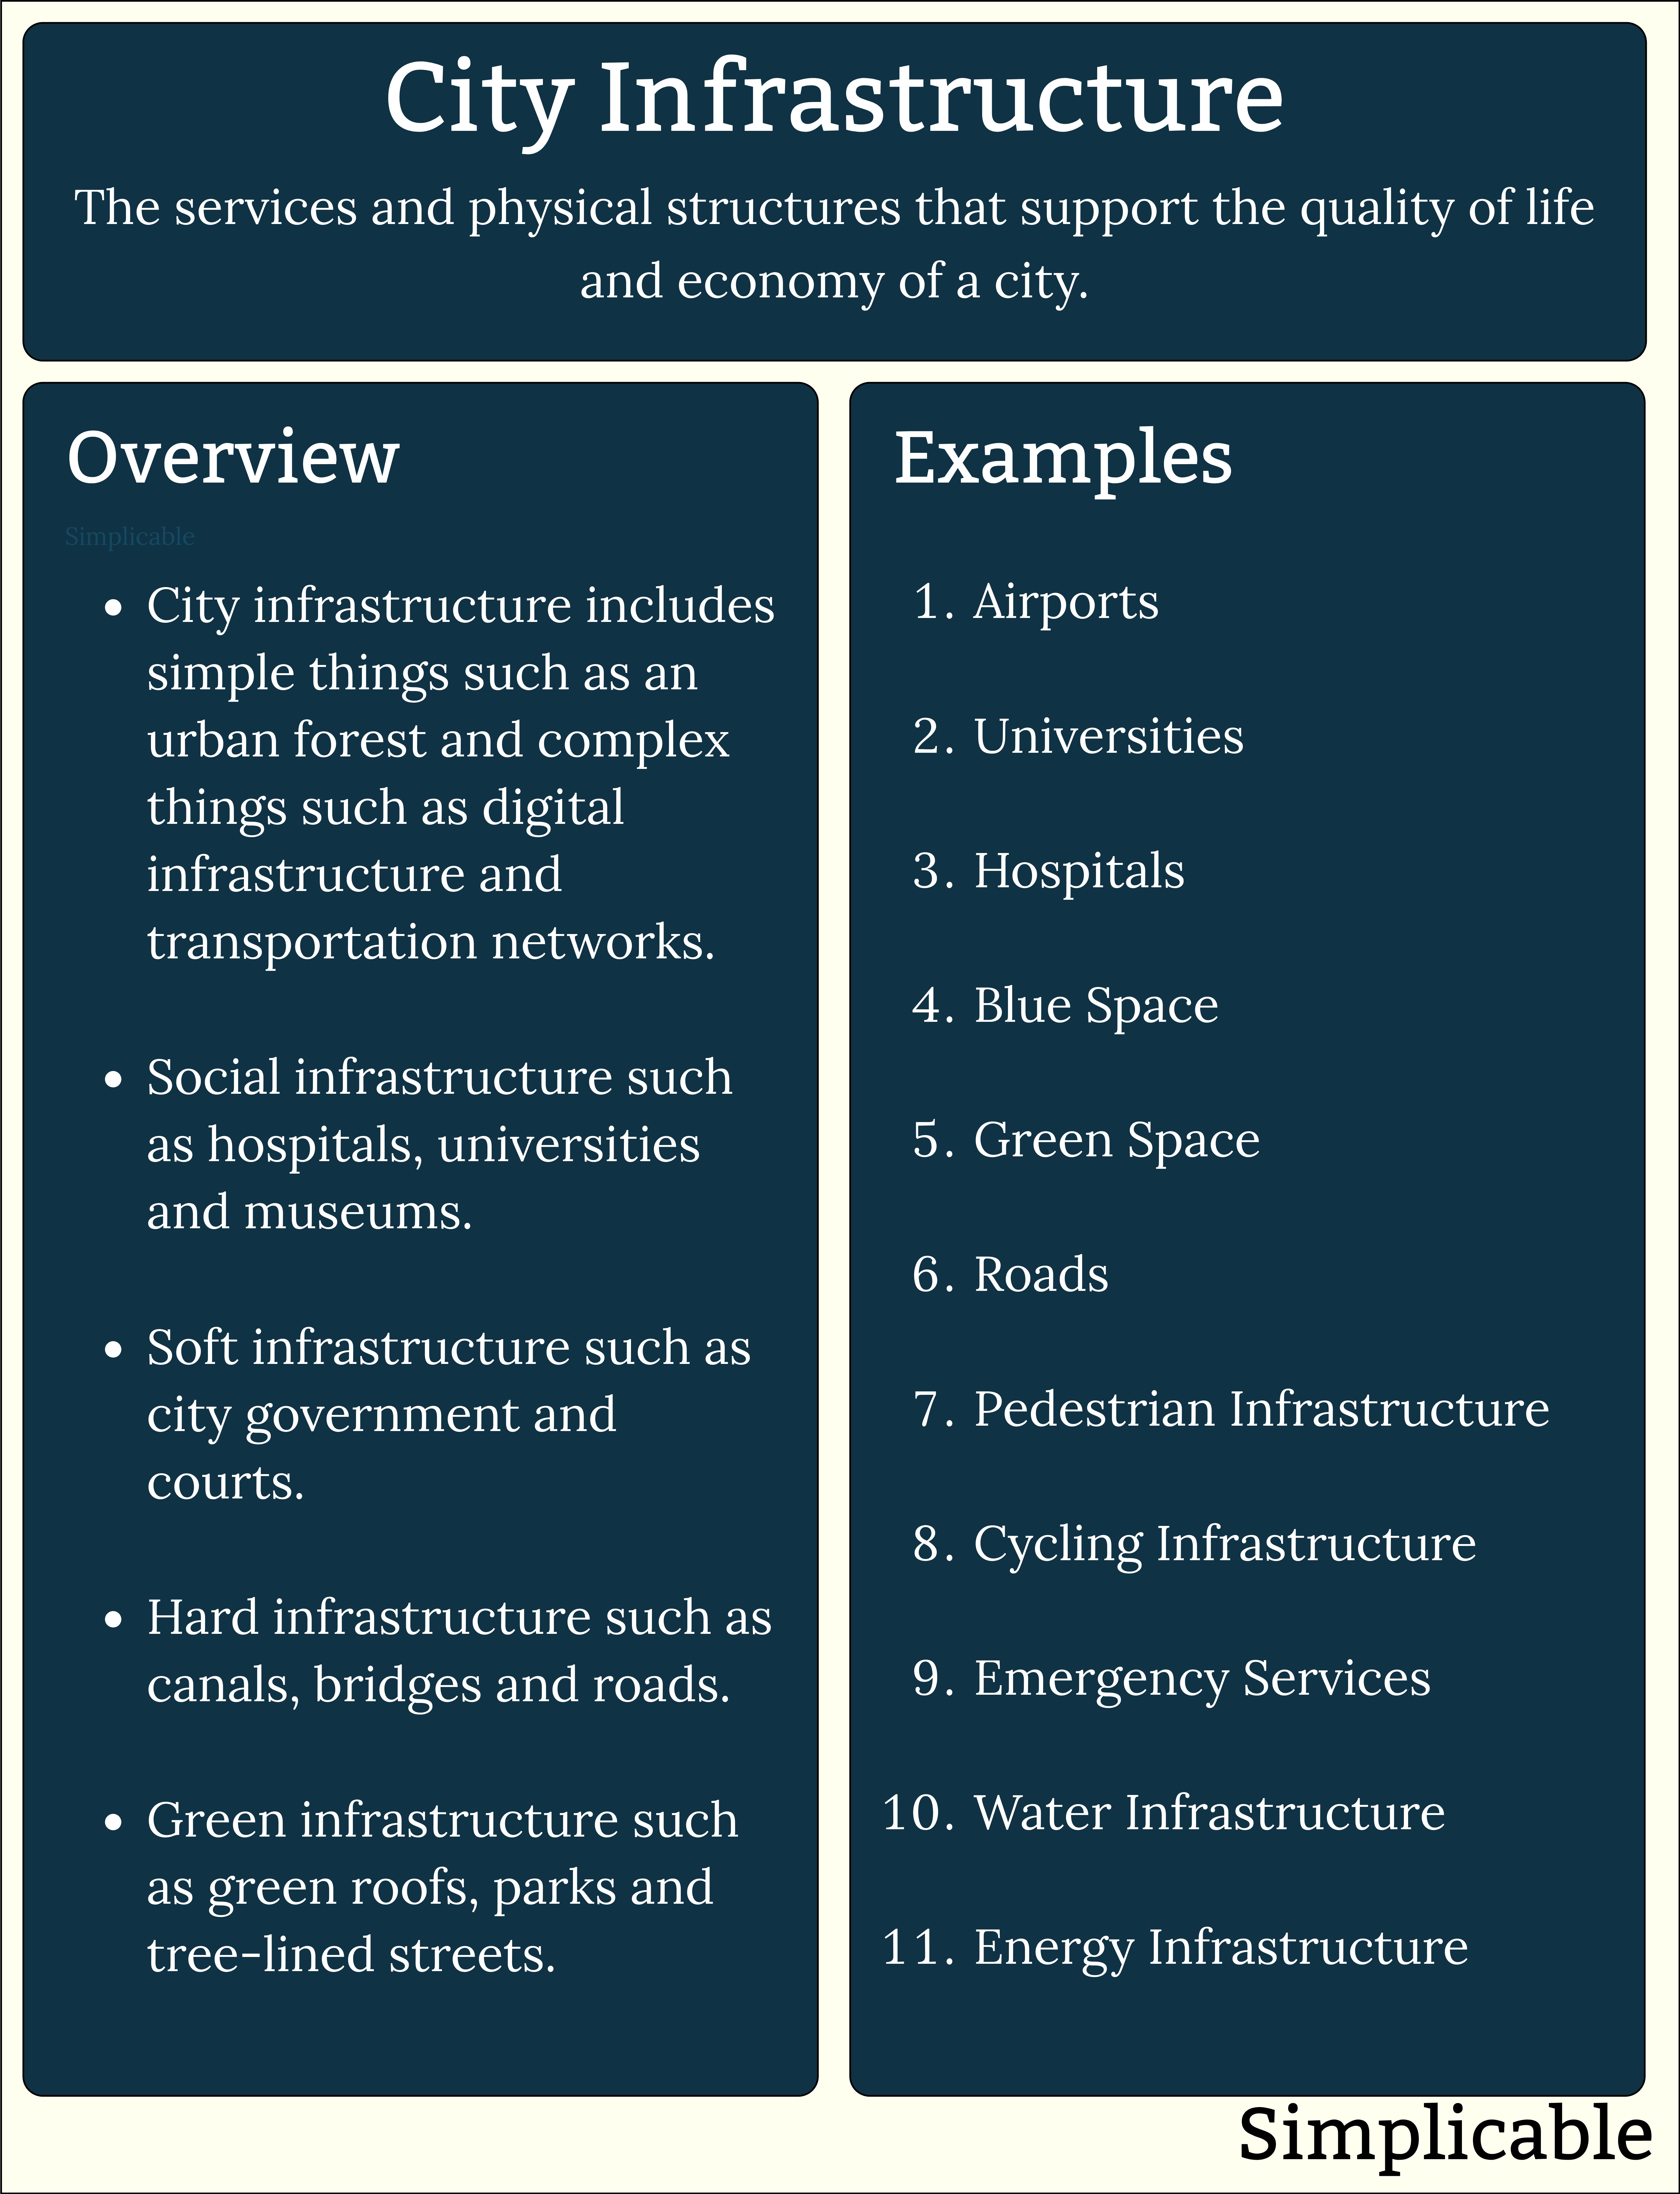 city infrastructure overview and examples